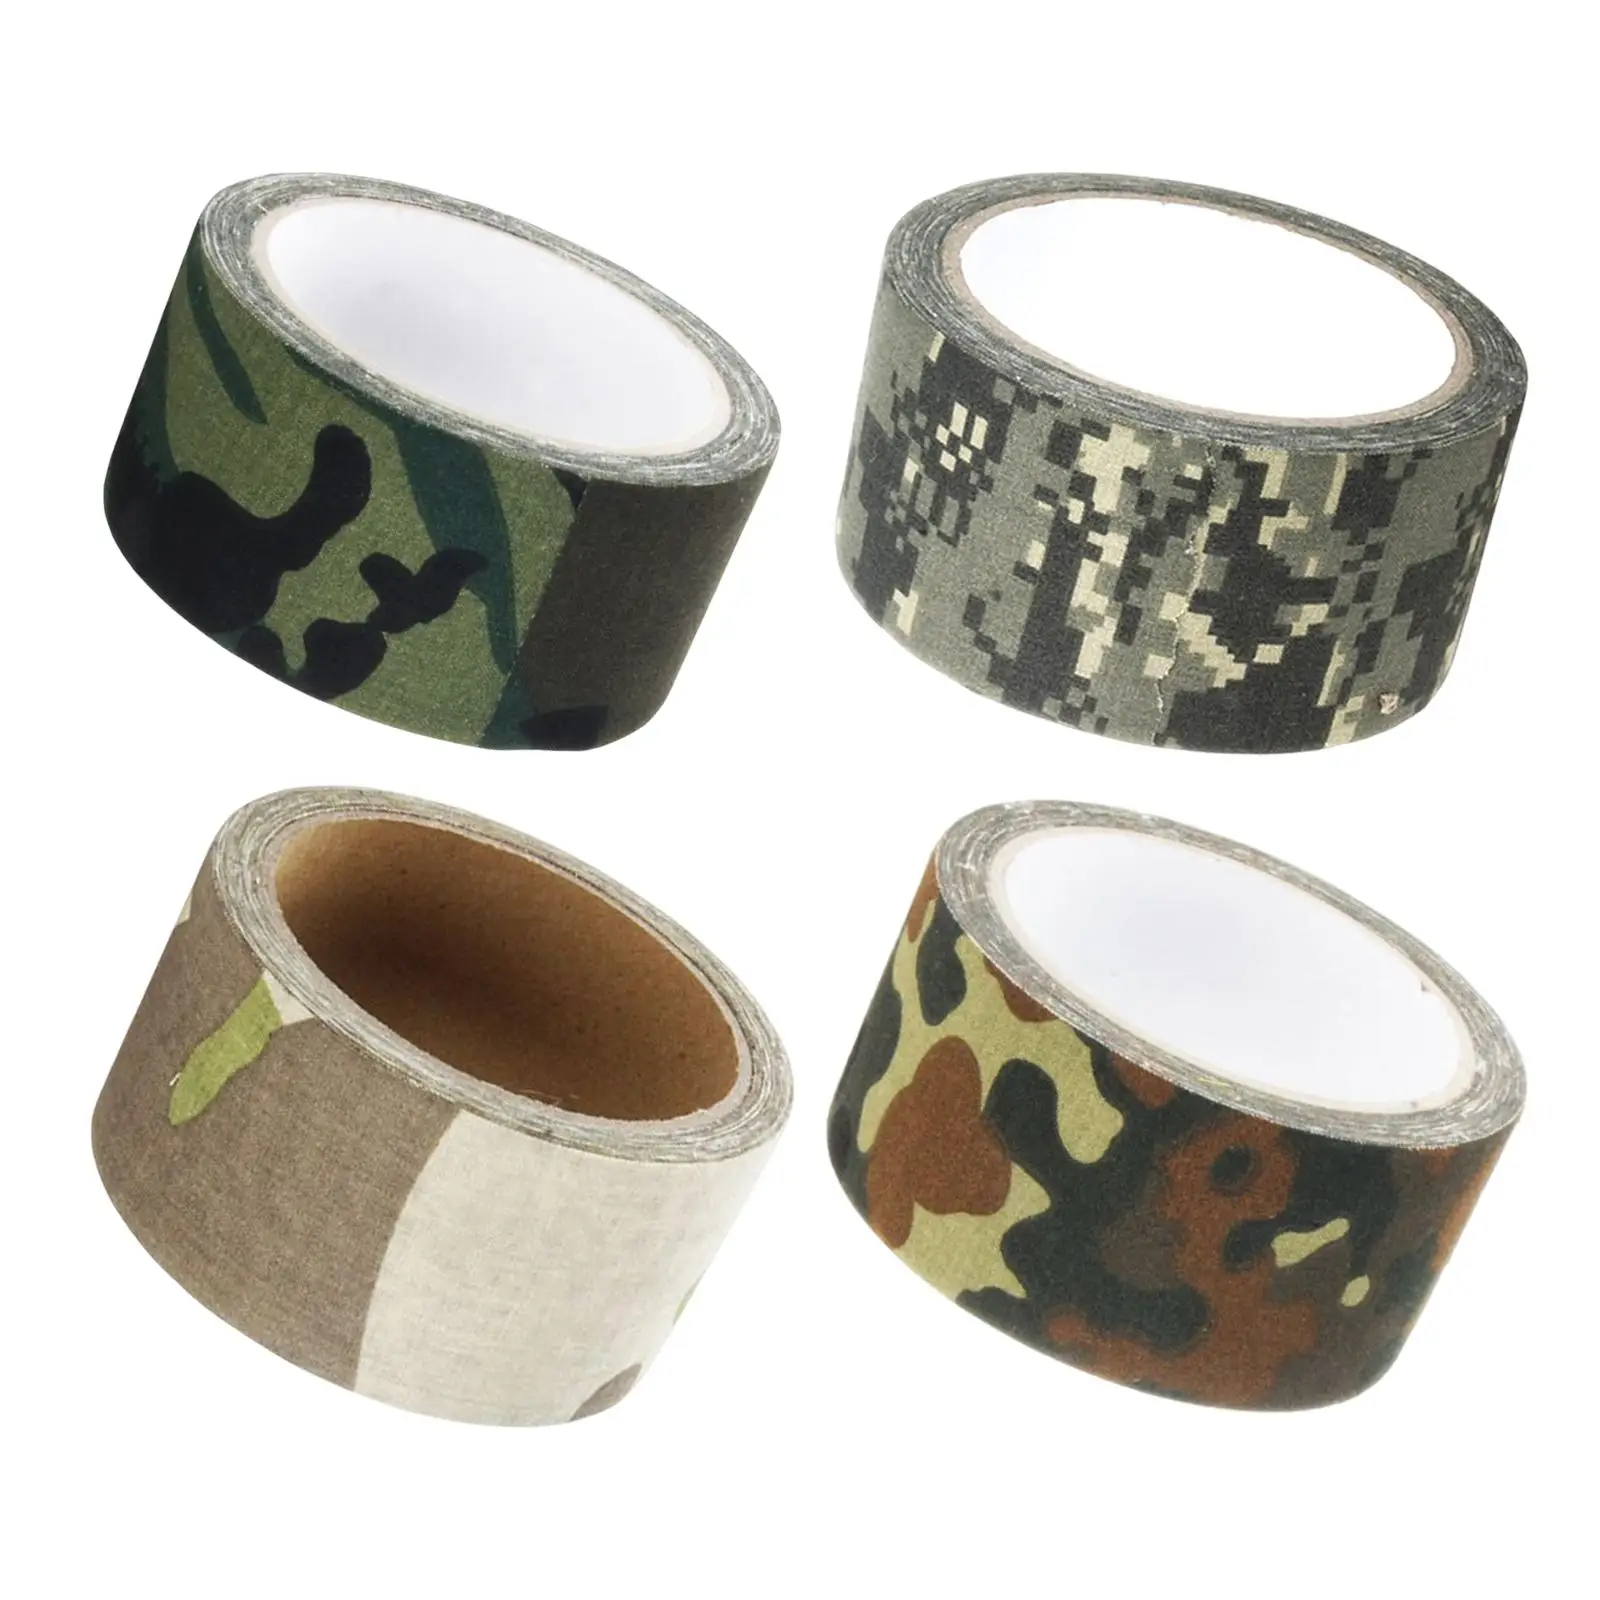 Self Adhesive Tape 1 Roll 10 Meter Long Hunting Tape Wrap for Hunting Camping Hiking